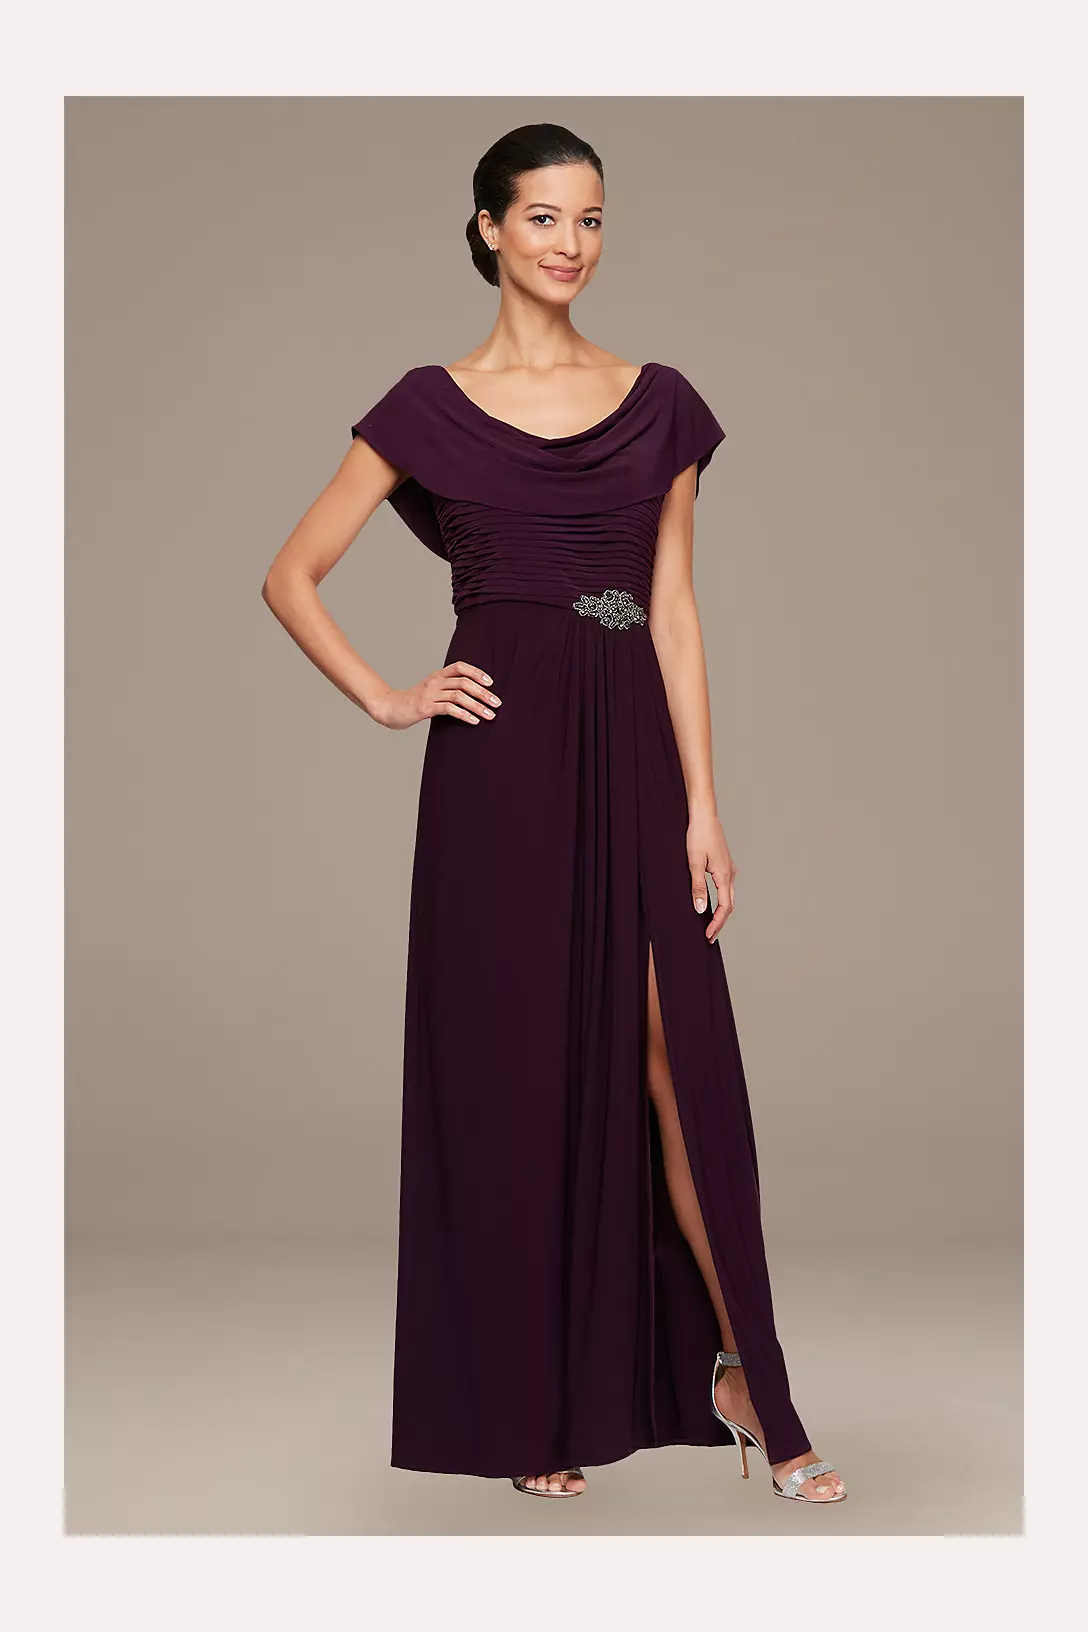 Petite Jersey Cowl Neck Dress with Embellishment Image